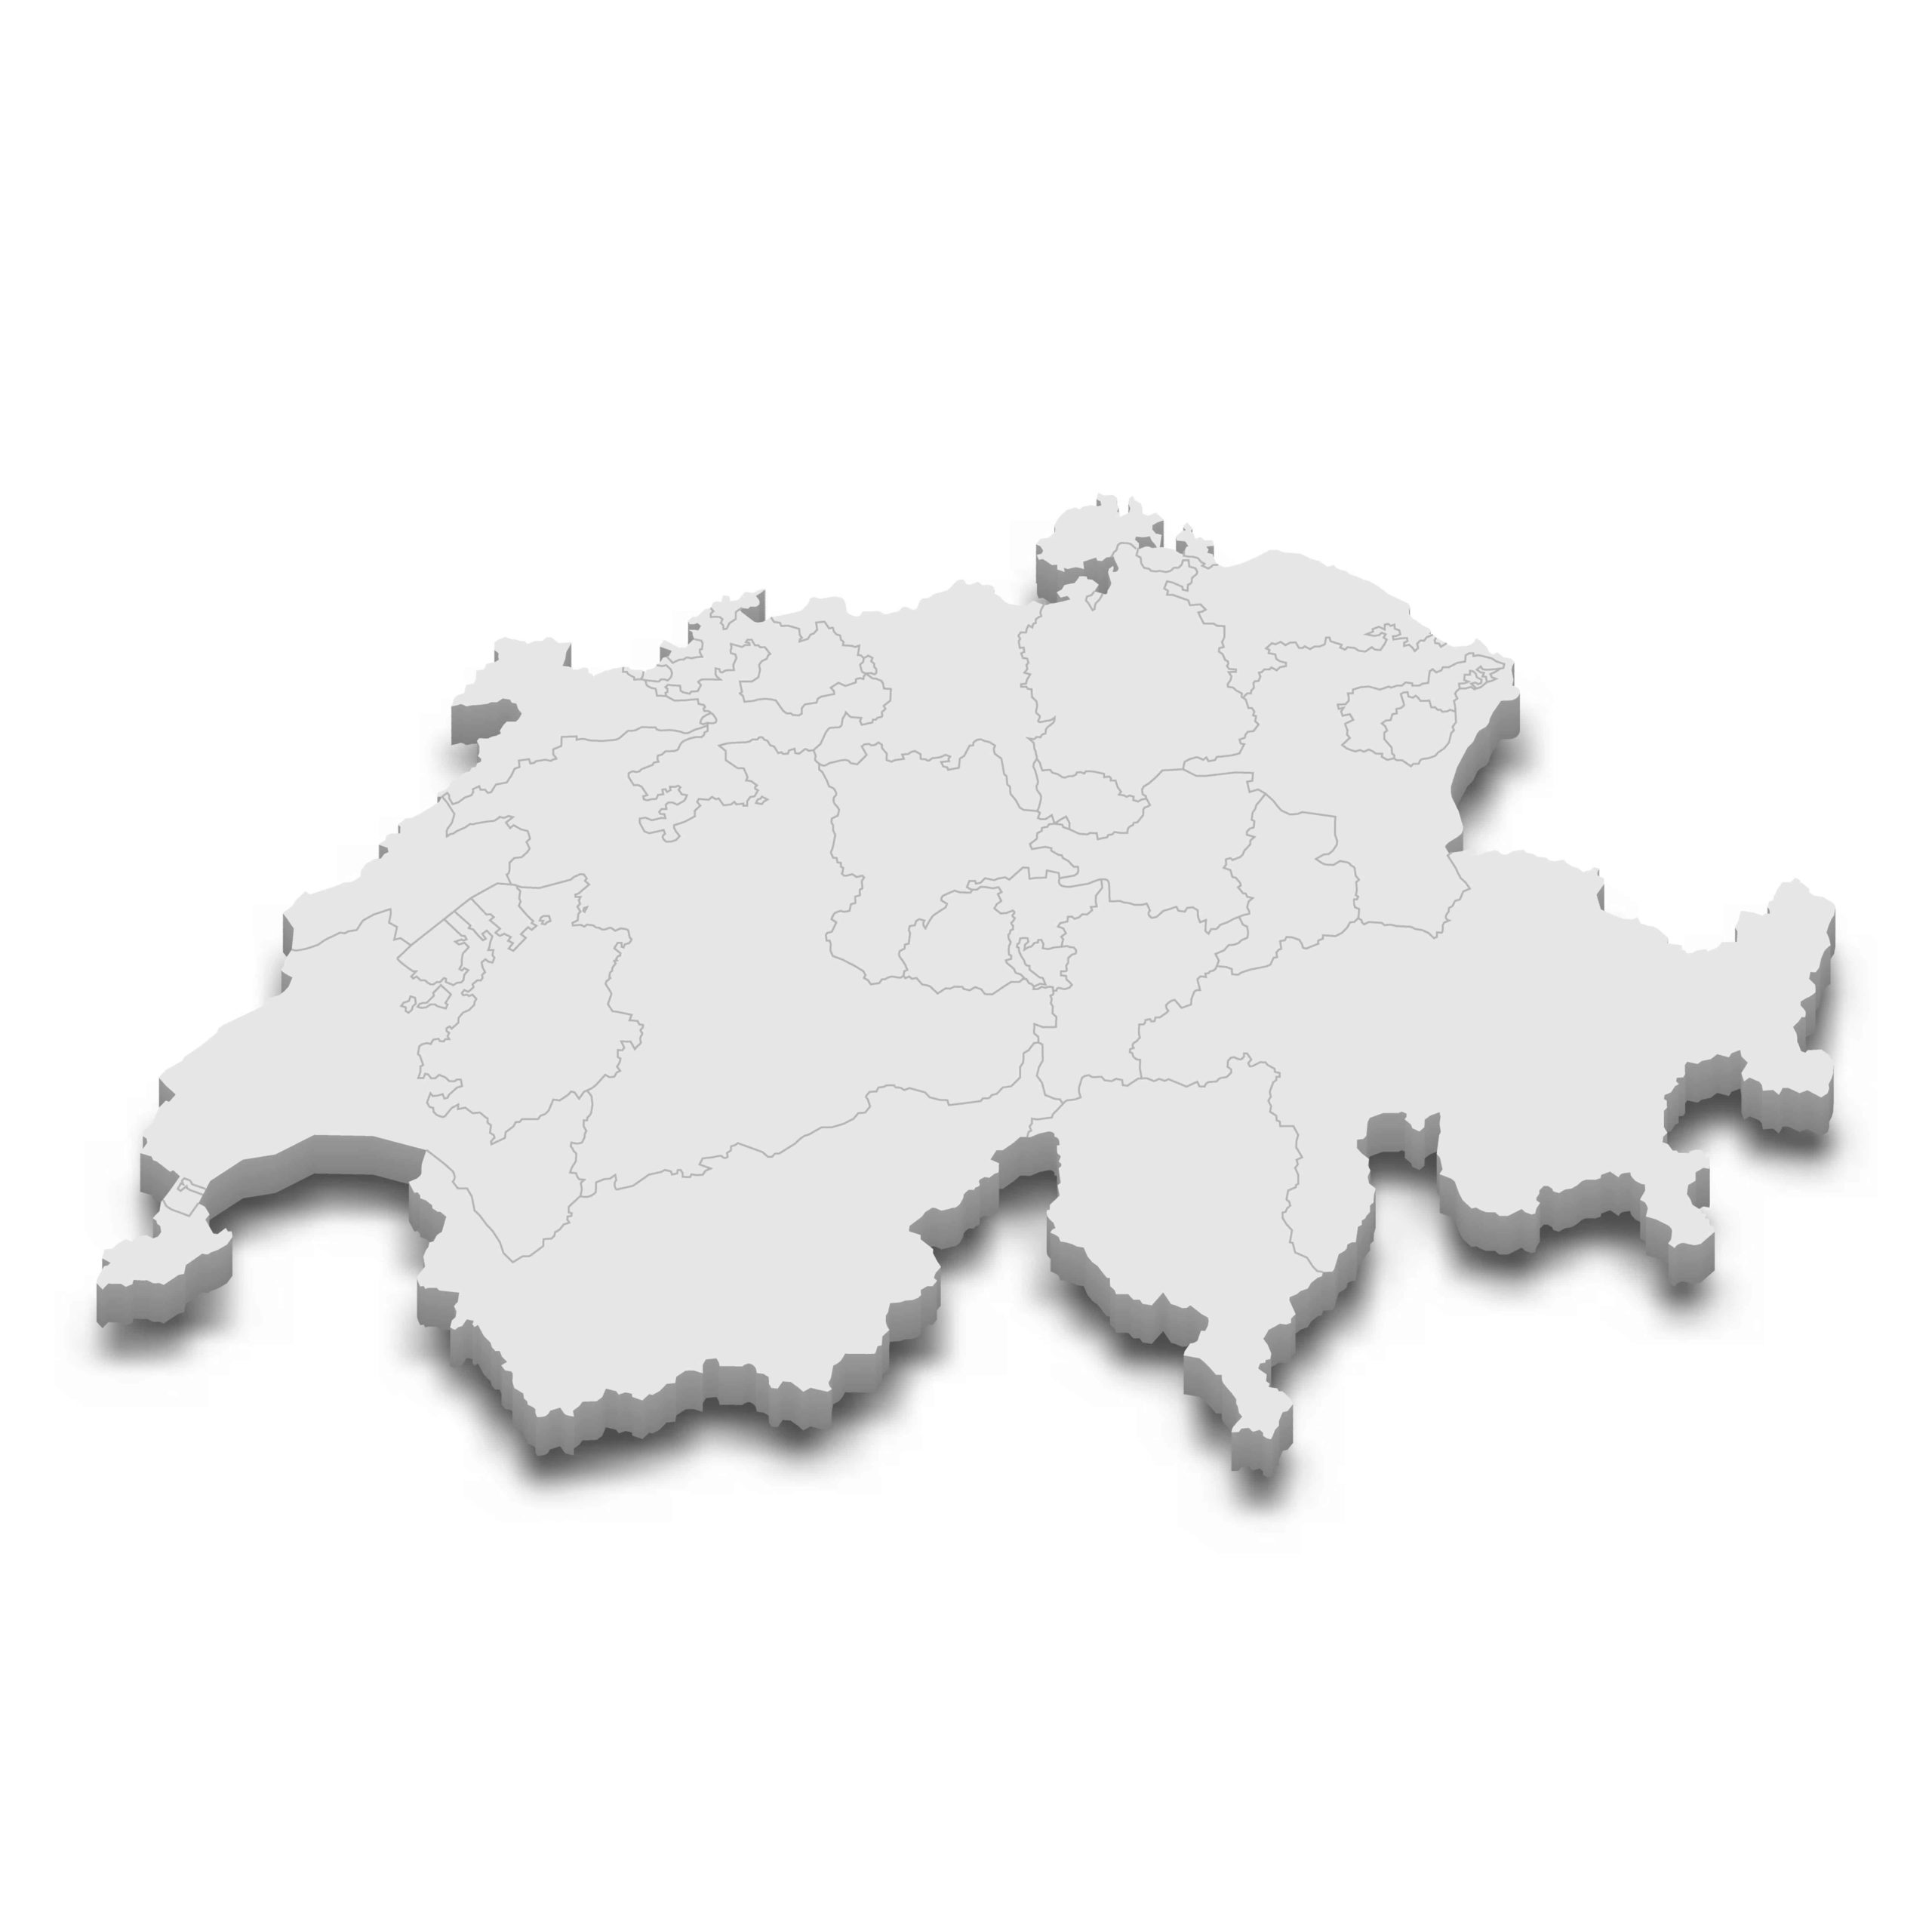 3d map with borders of regions